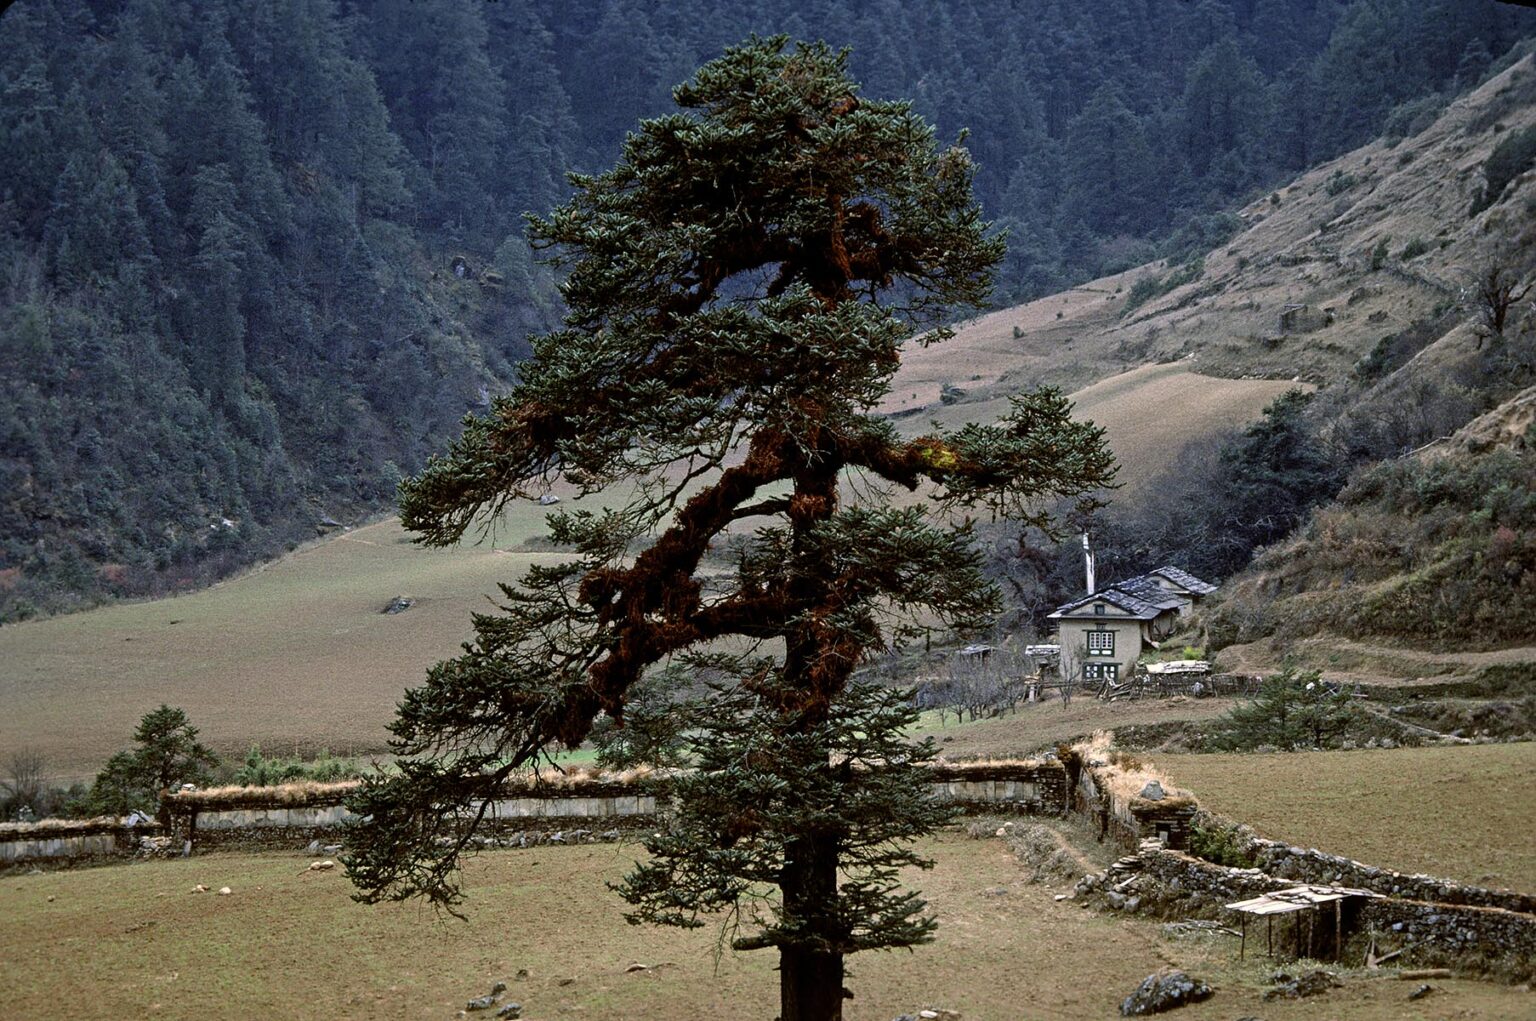 Giant tree and the SOLU VALLEY  NEPAL